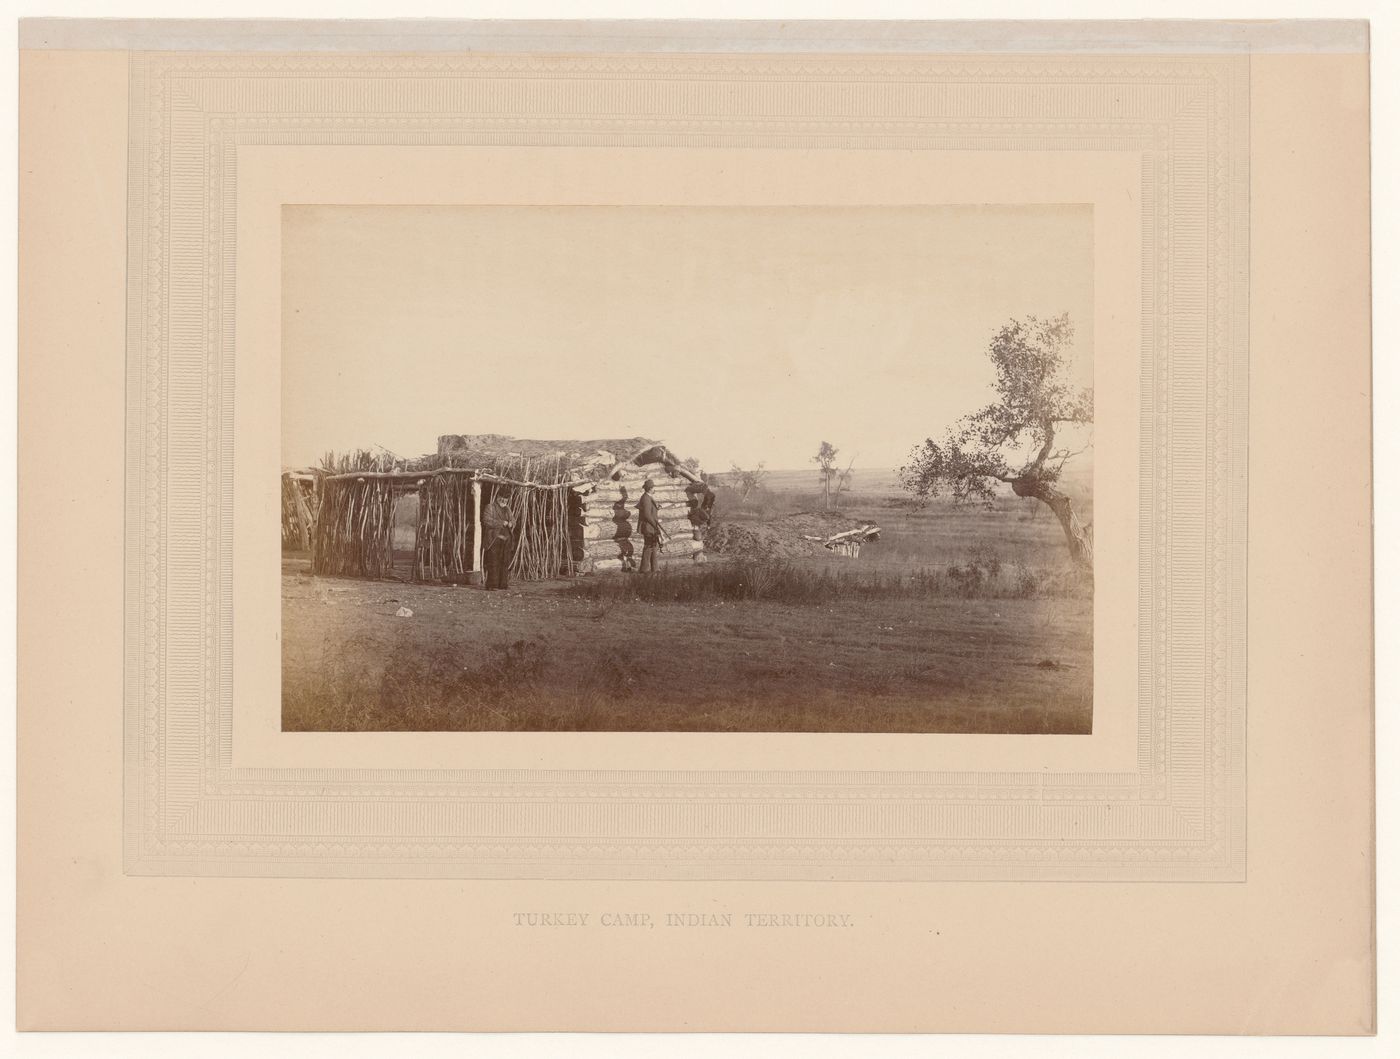 View of turkey hunting camp with two men in front of log cabin with sod roof, "Indian Territory" (now Oklahoma?), United States